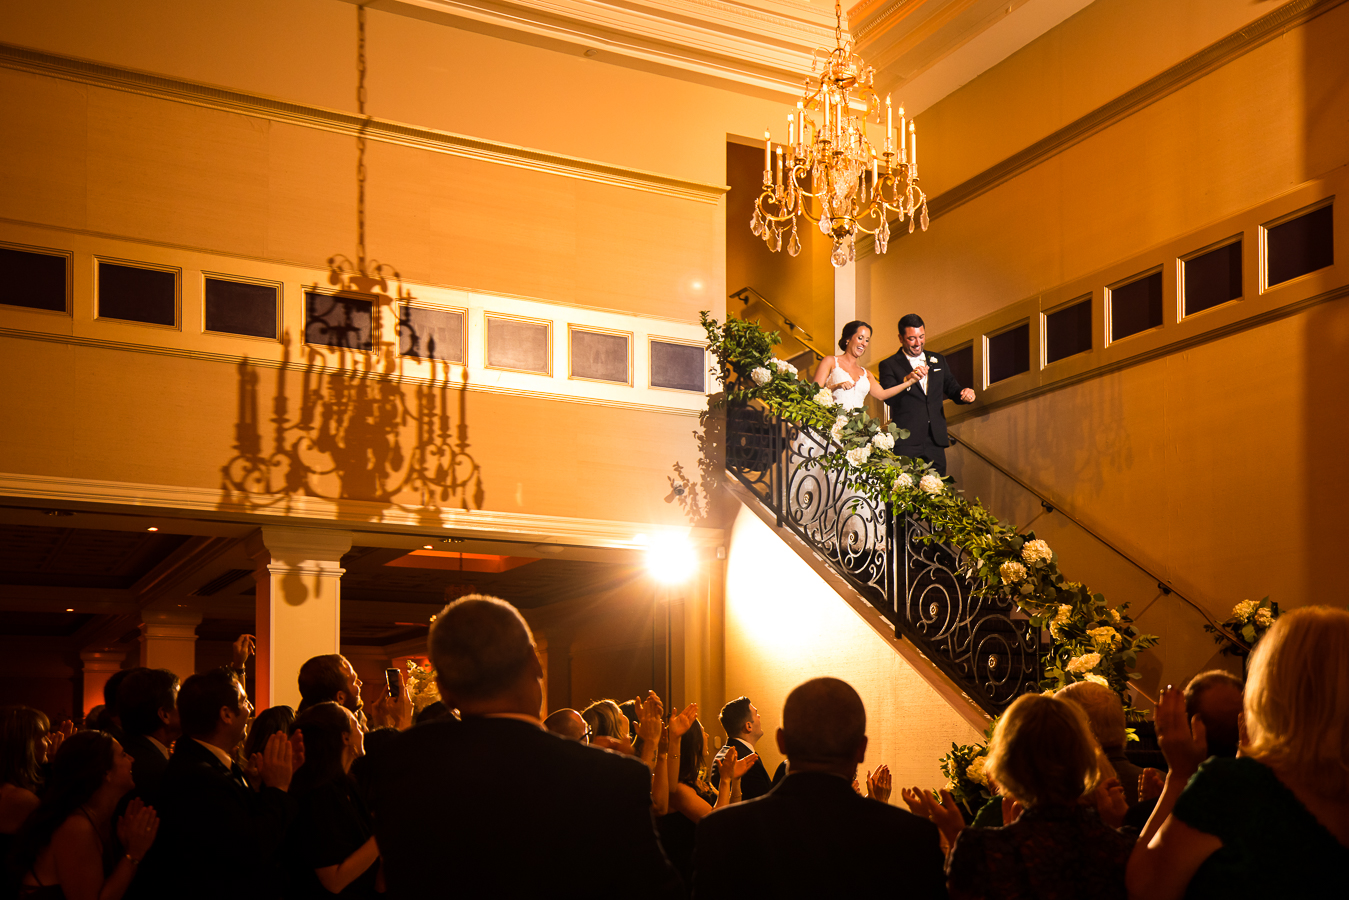 nj wedding photographer, lisa rhinehart, captures this black and gold wedding reception moment of the bride and groom as they walk down the grand staircase holding hands into their wedding reception at the palace at somerset park 